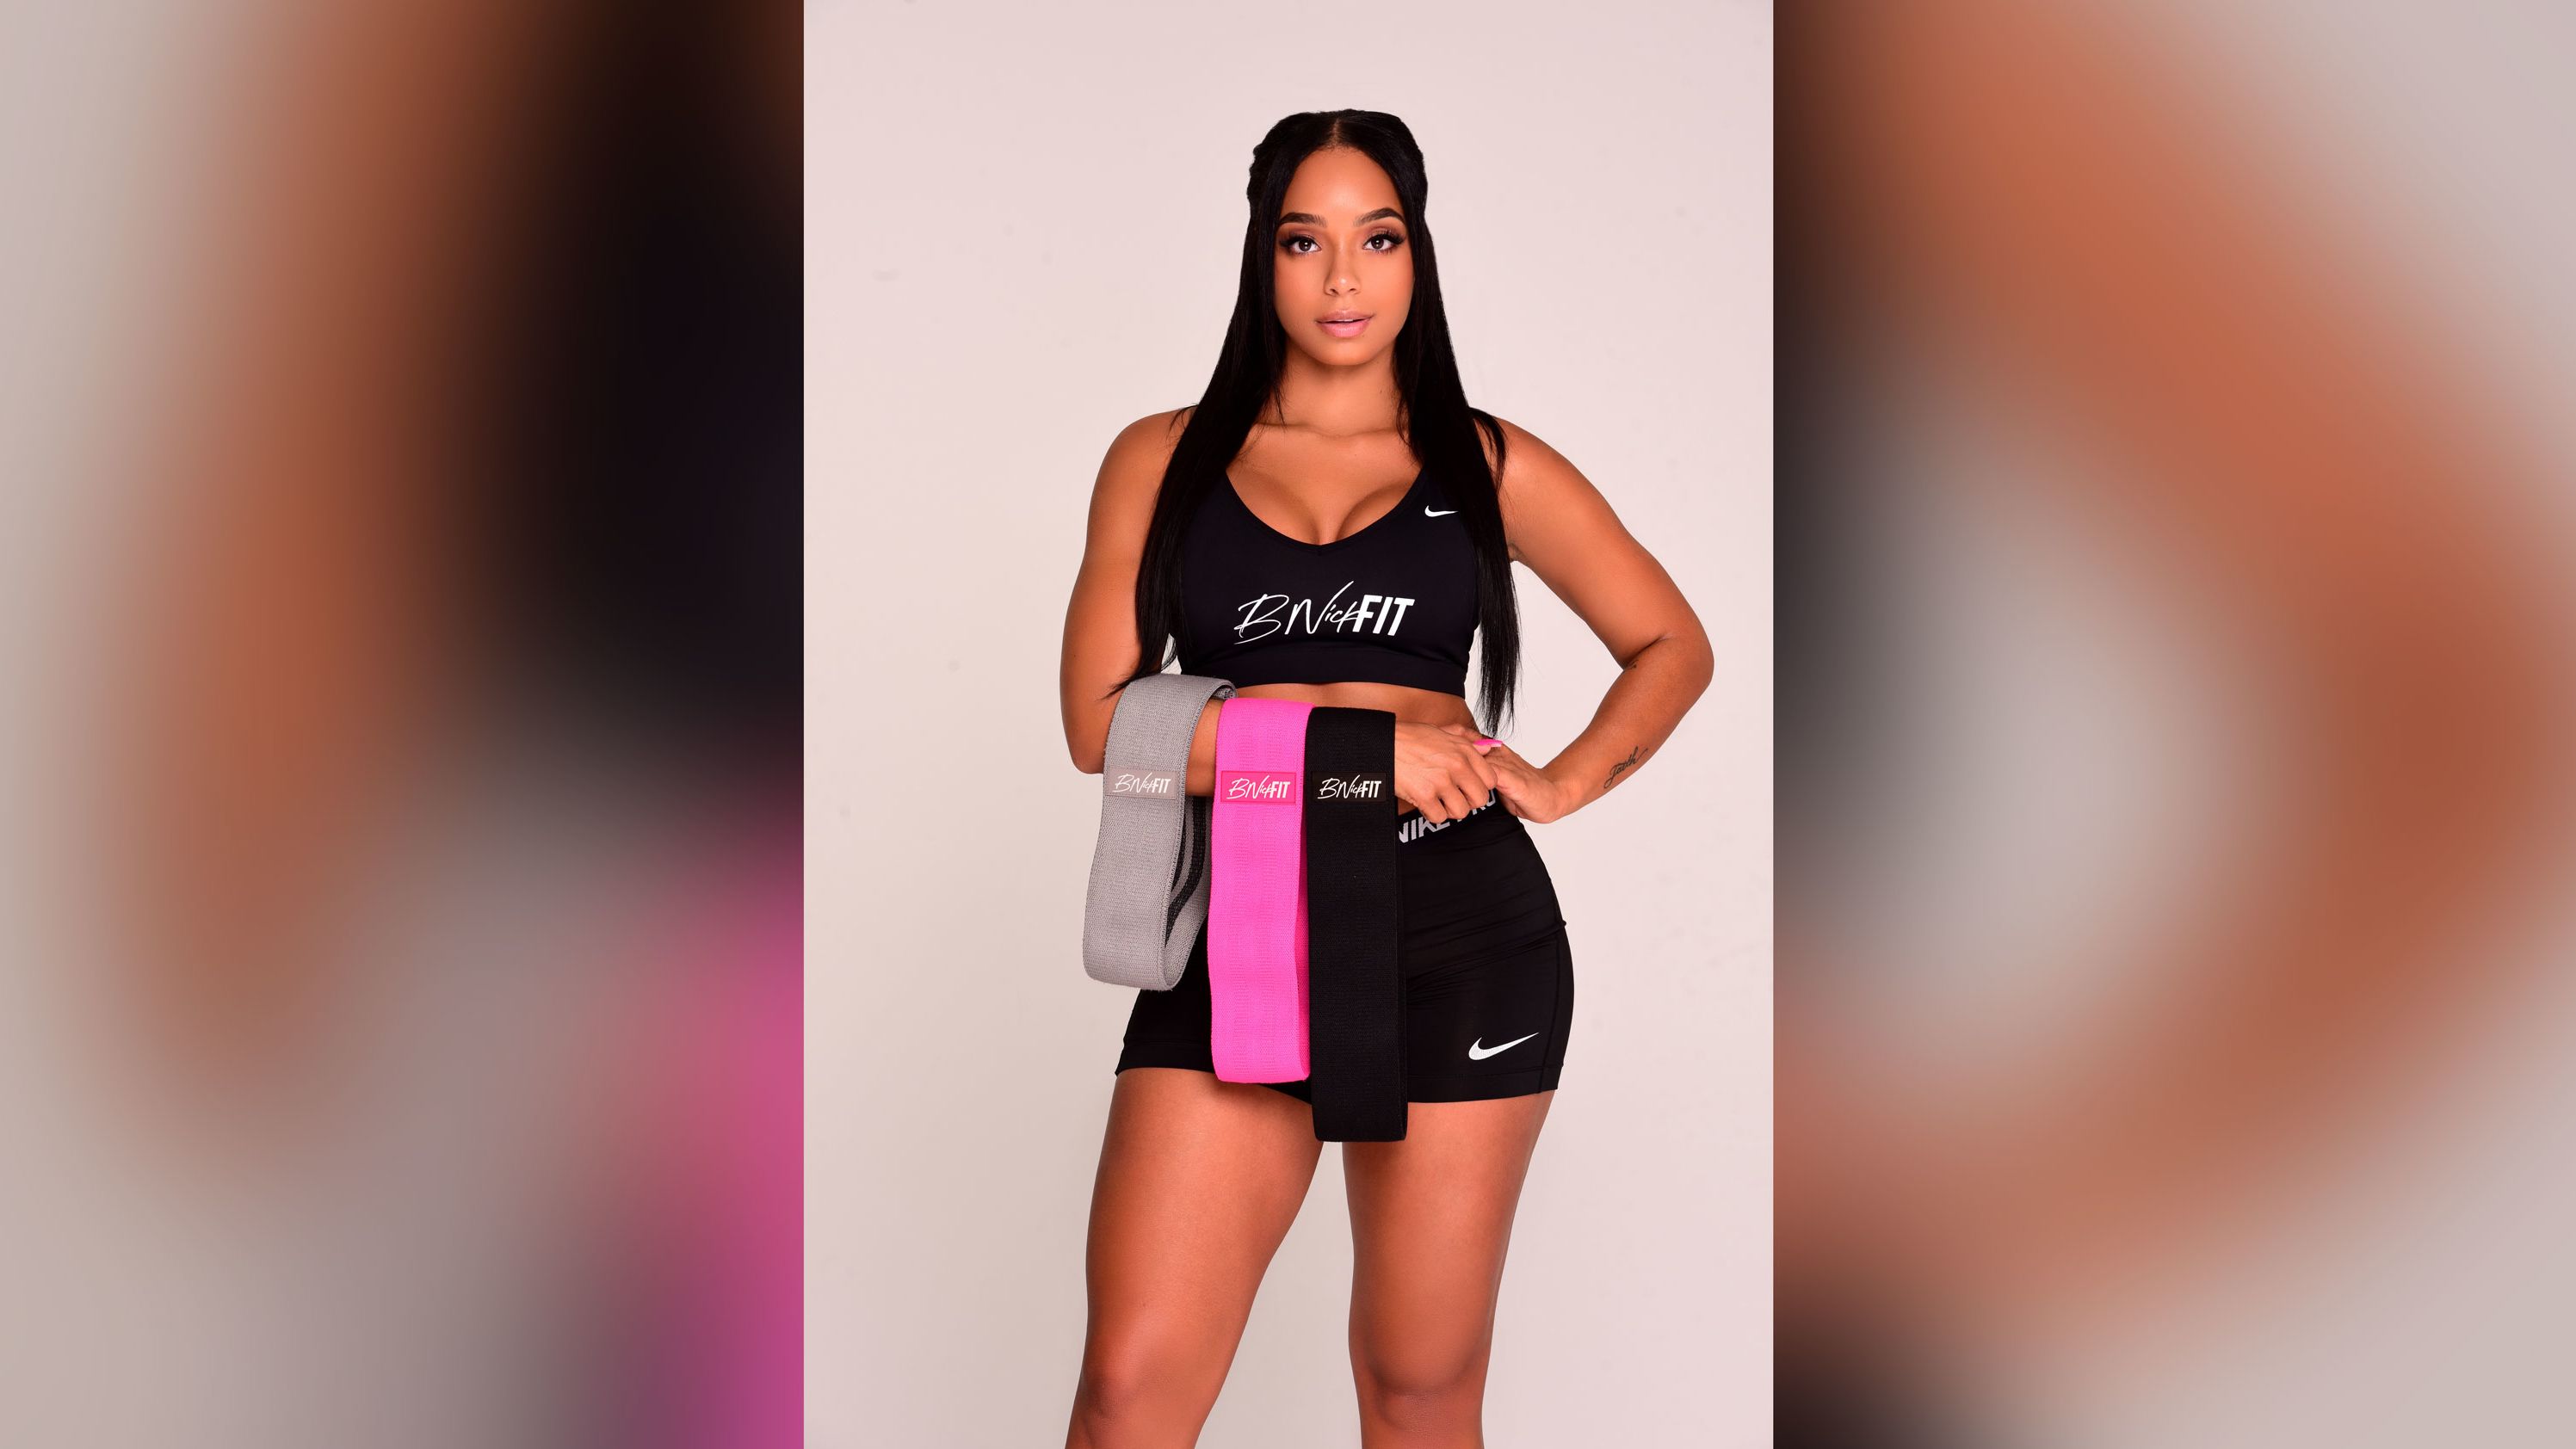 Bria Young is an Atlanta-based trainer who went full virtual during the pandemic and tripled her income. She has not plans to go back to in-person training.